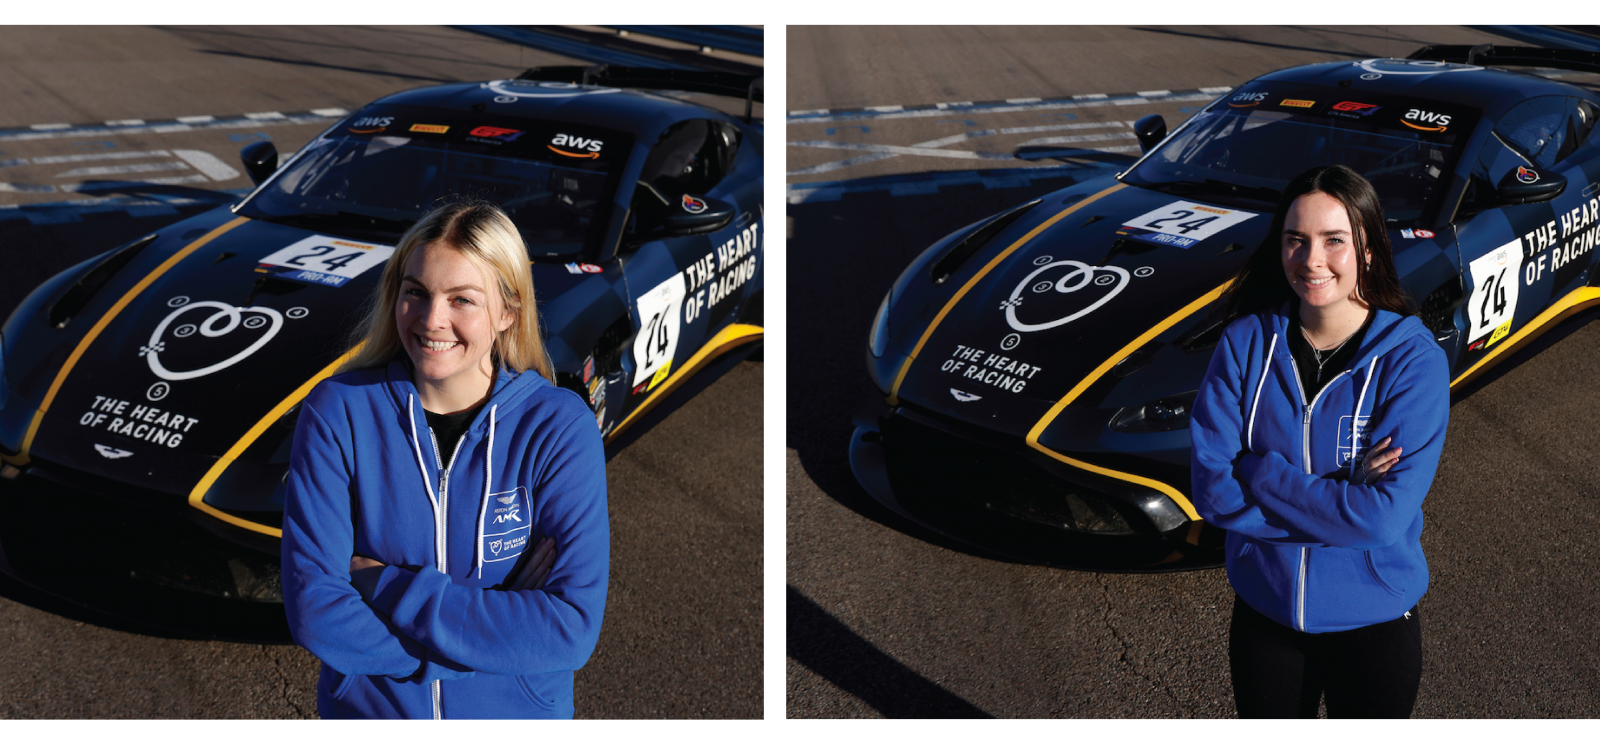 The Heart of Racing Chooses Two Female Shootout Winners